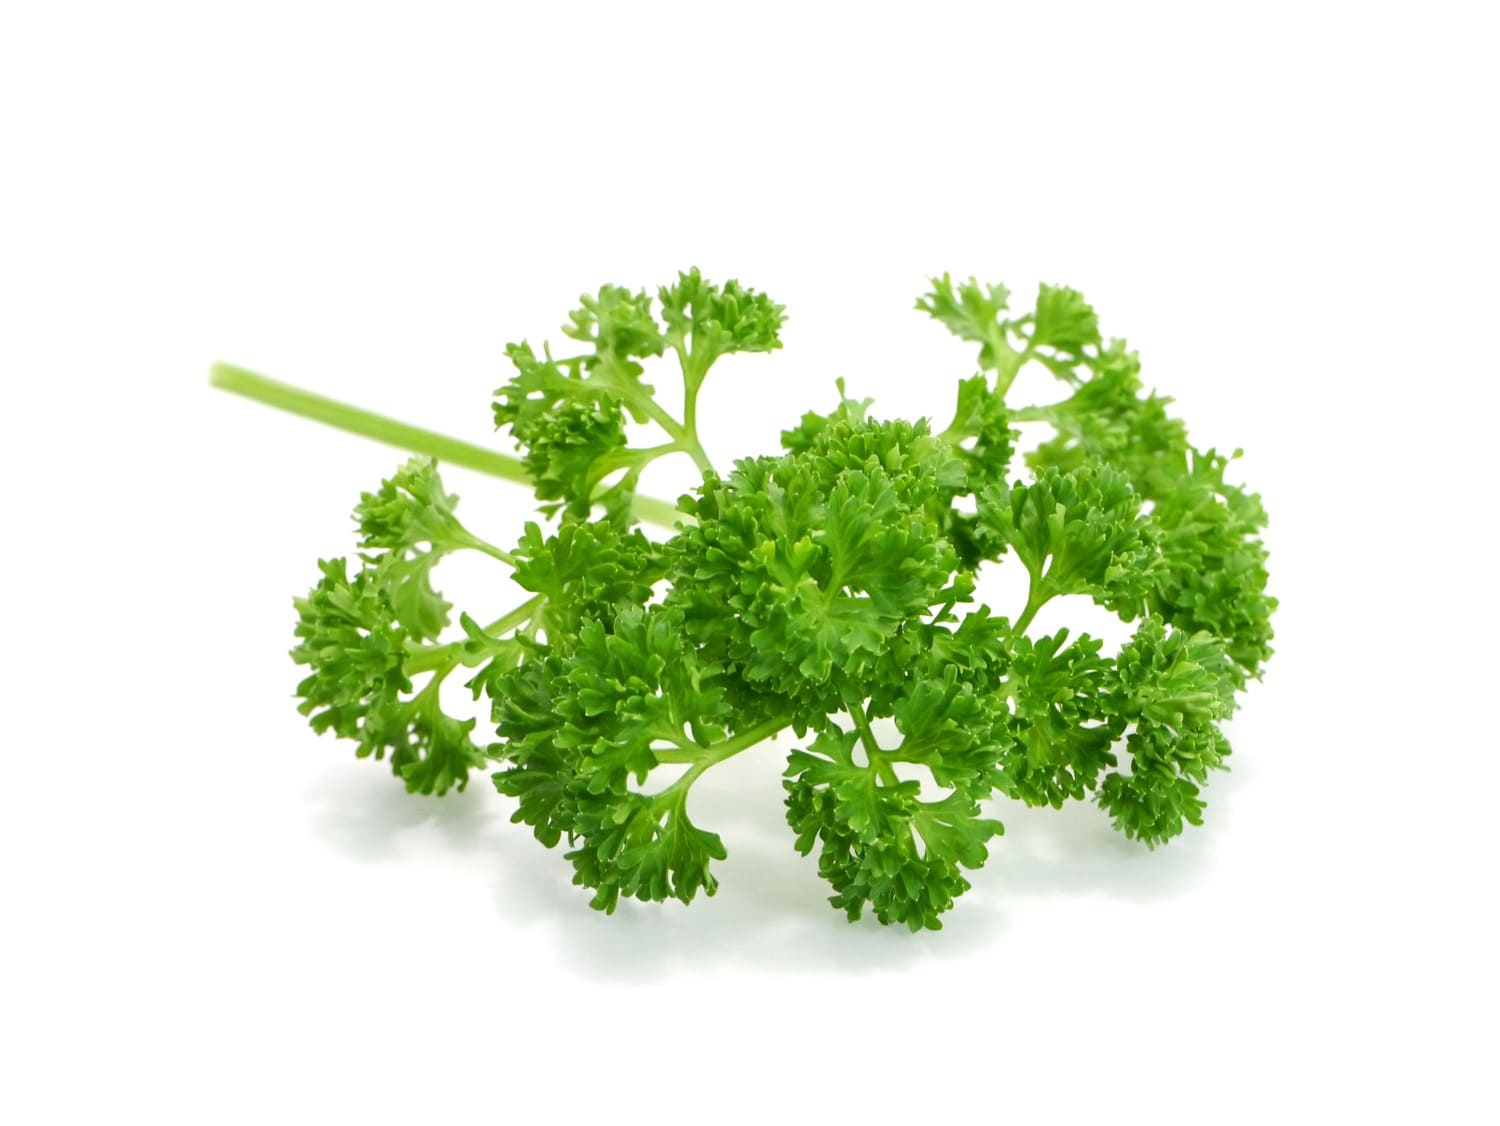 Moss Curled Parsley(32x - Subscription Only)